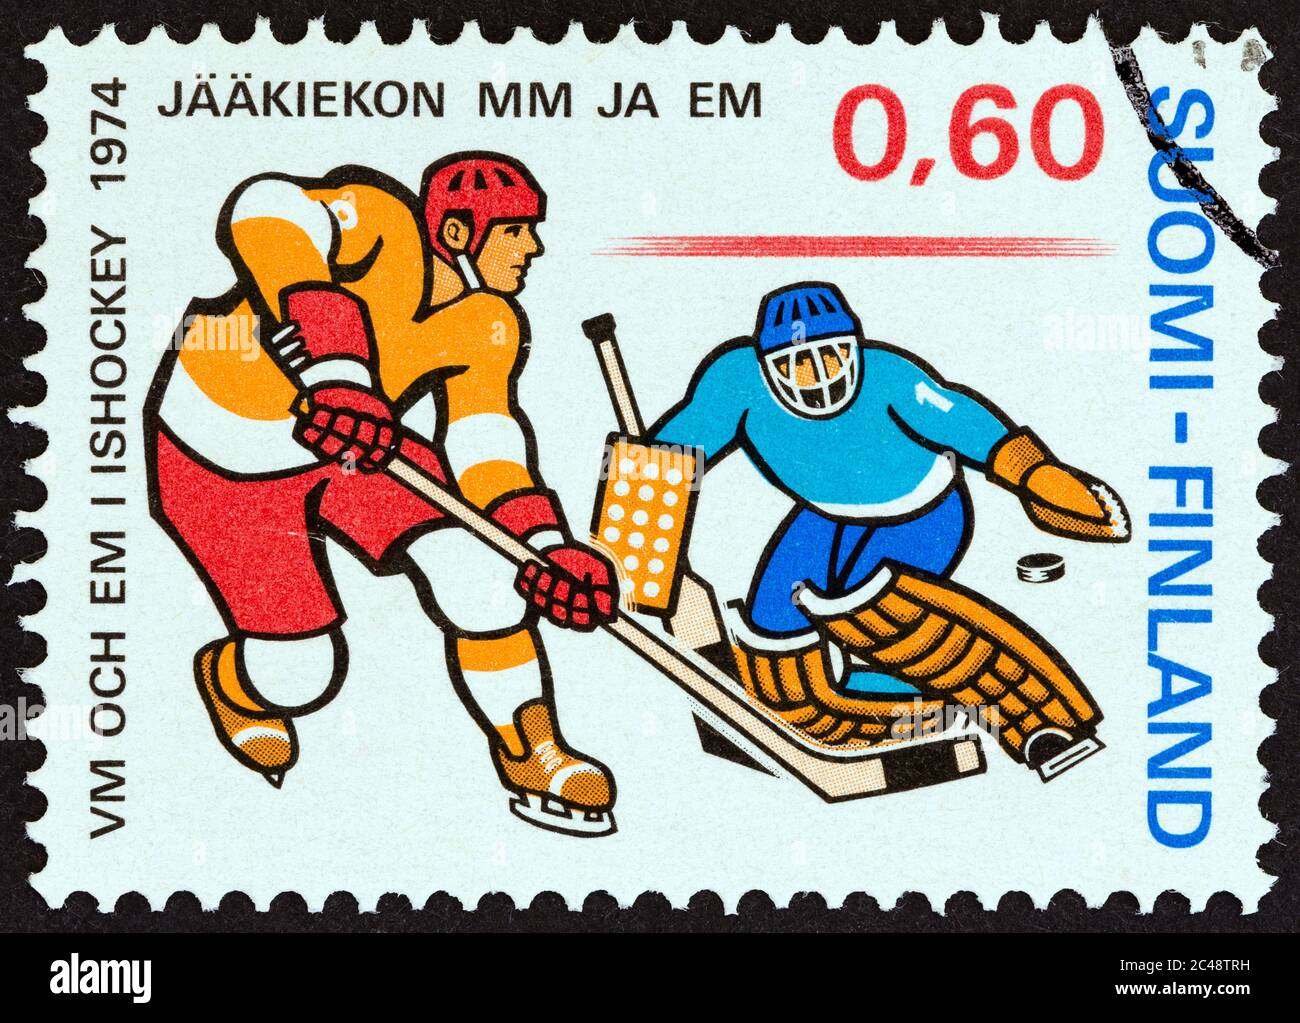 FINLAND - CIRCA 1974: A stamp printed in Finland from the 'World and European Ice Hockey Championships' issue shows Ice Hockey players, circa 1974. Stock Photo